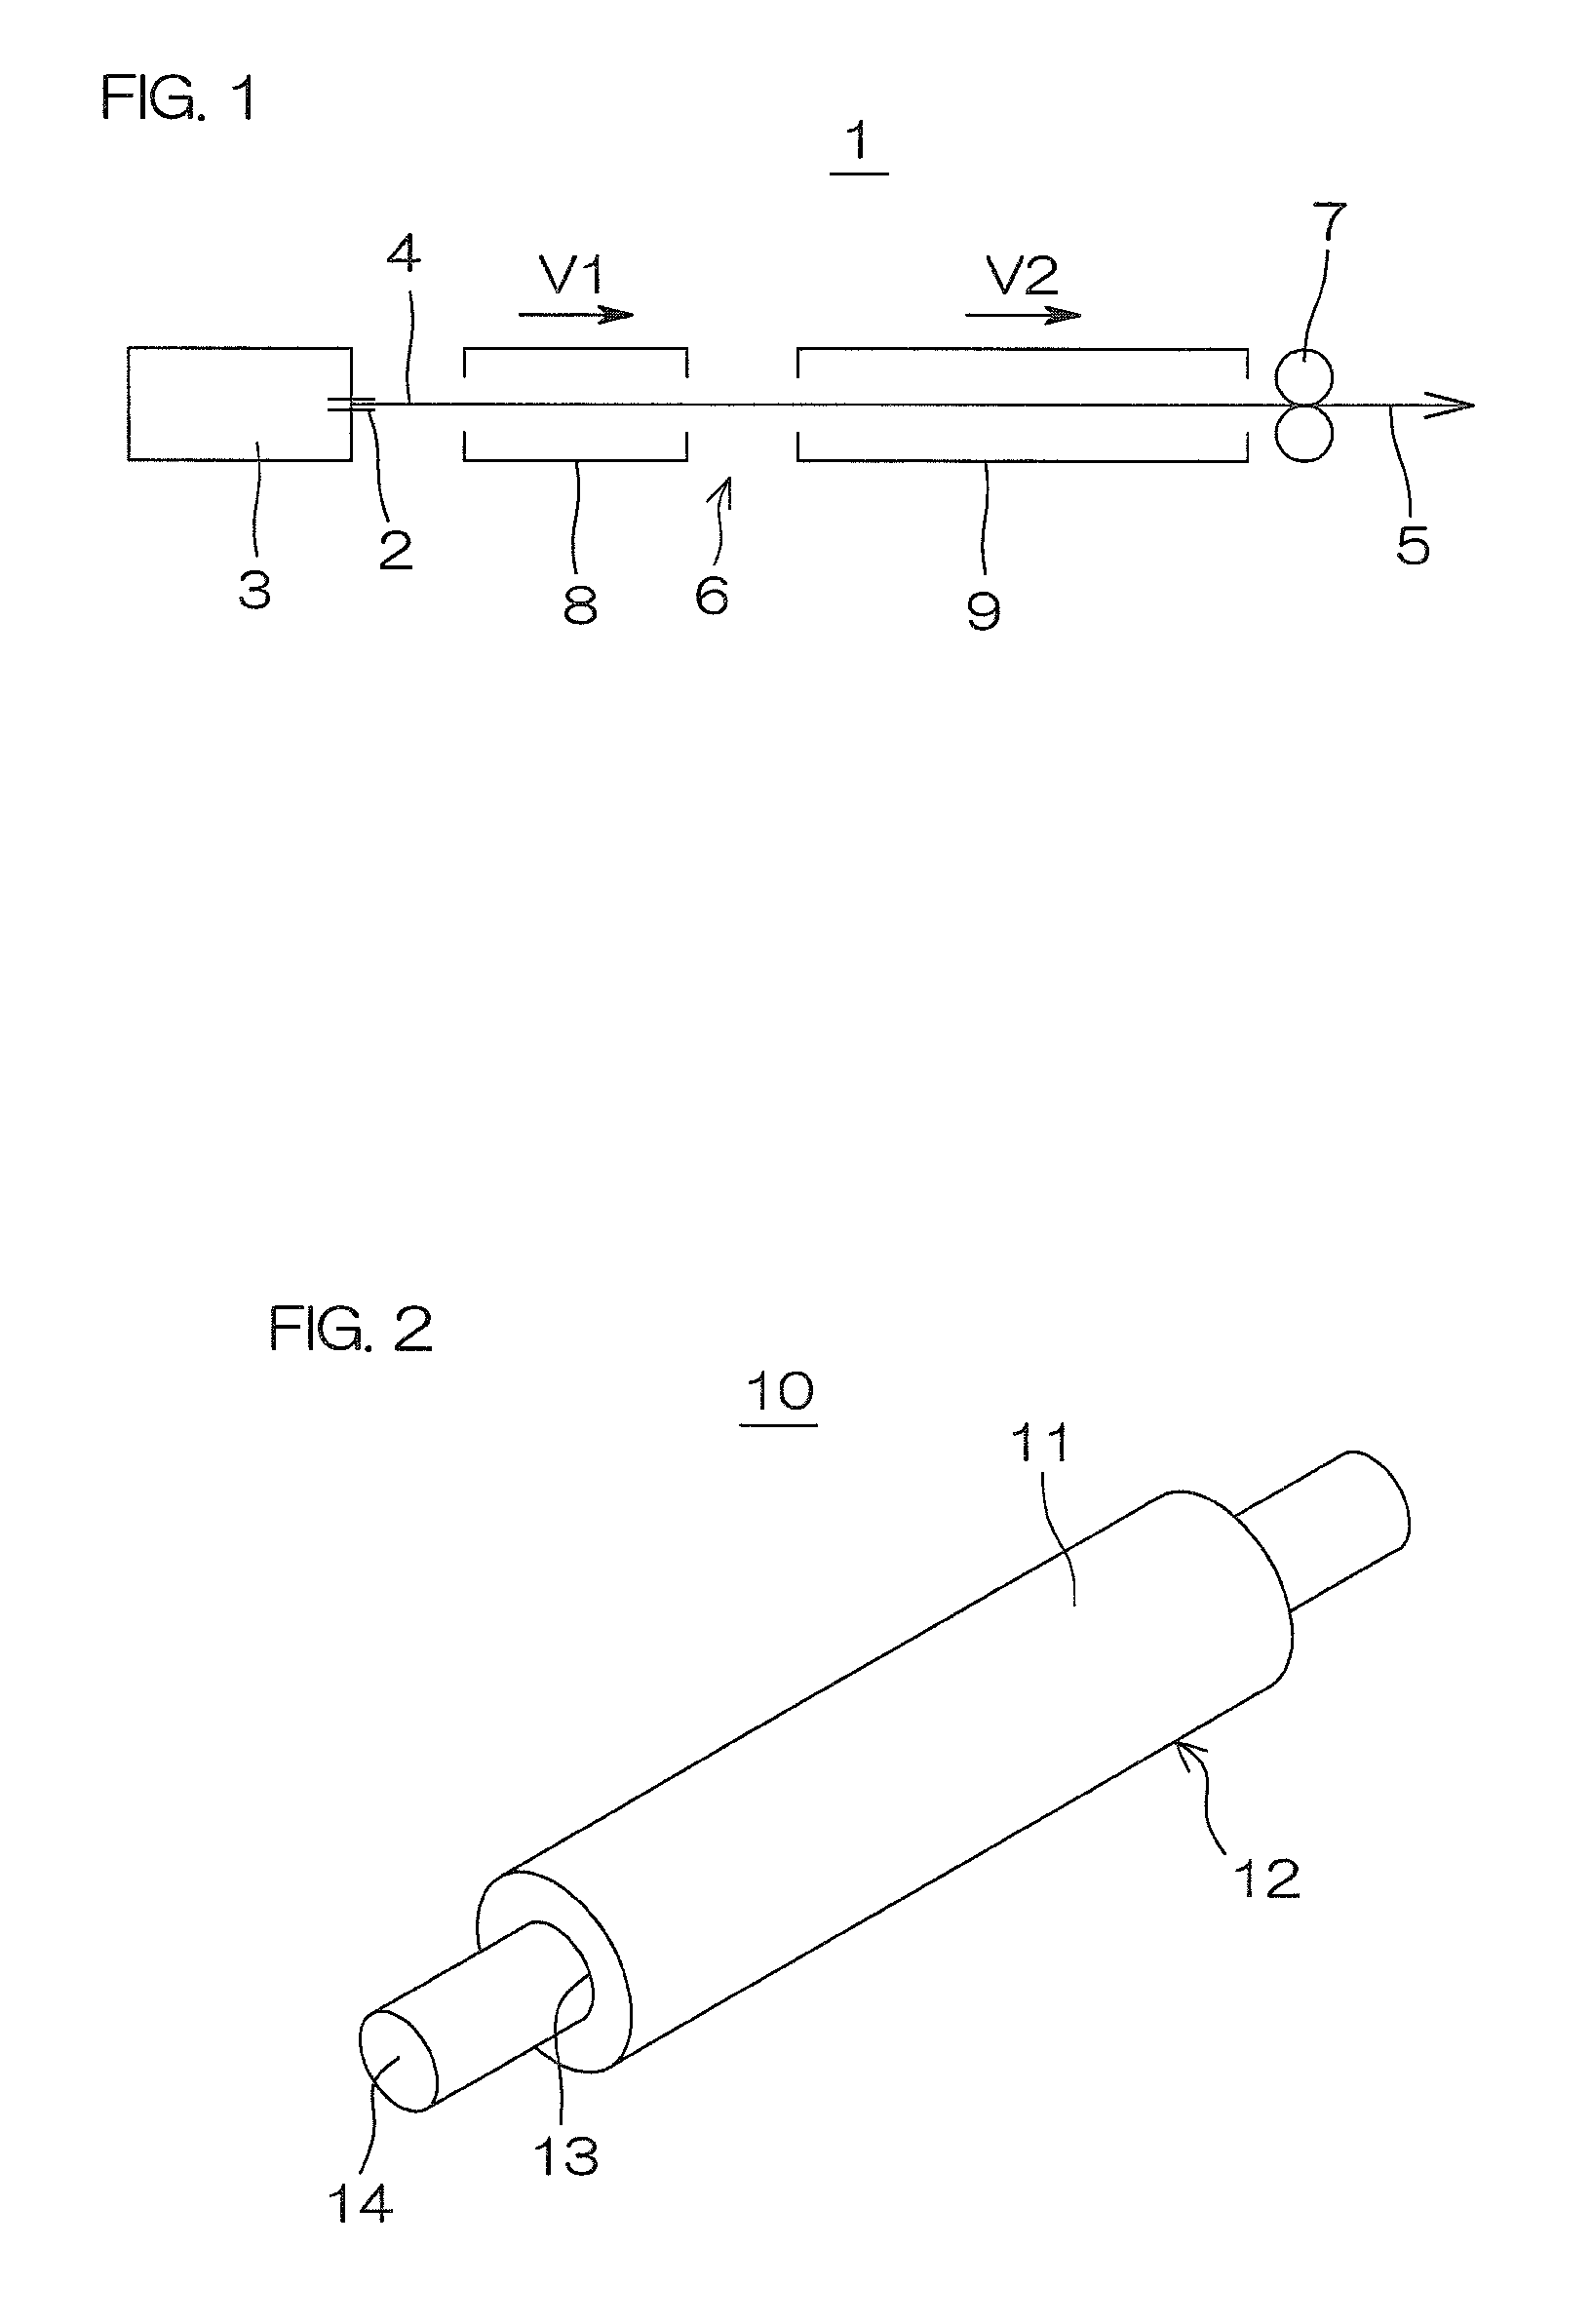 Method of producing an electrically conductive roller from a rubber foam tube